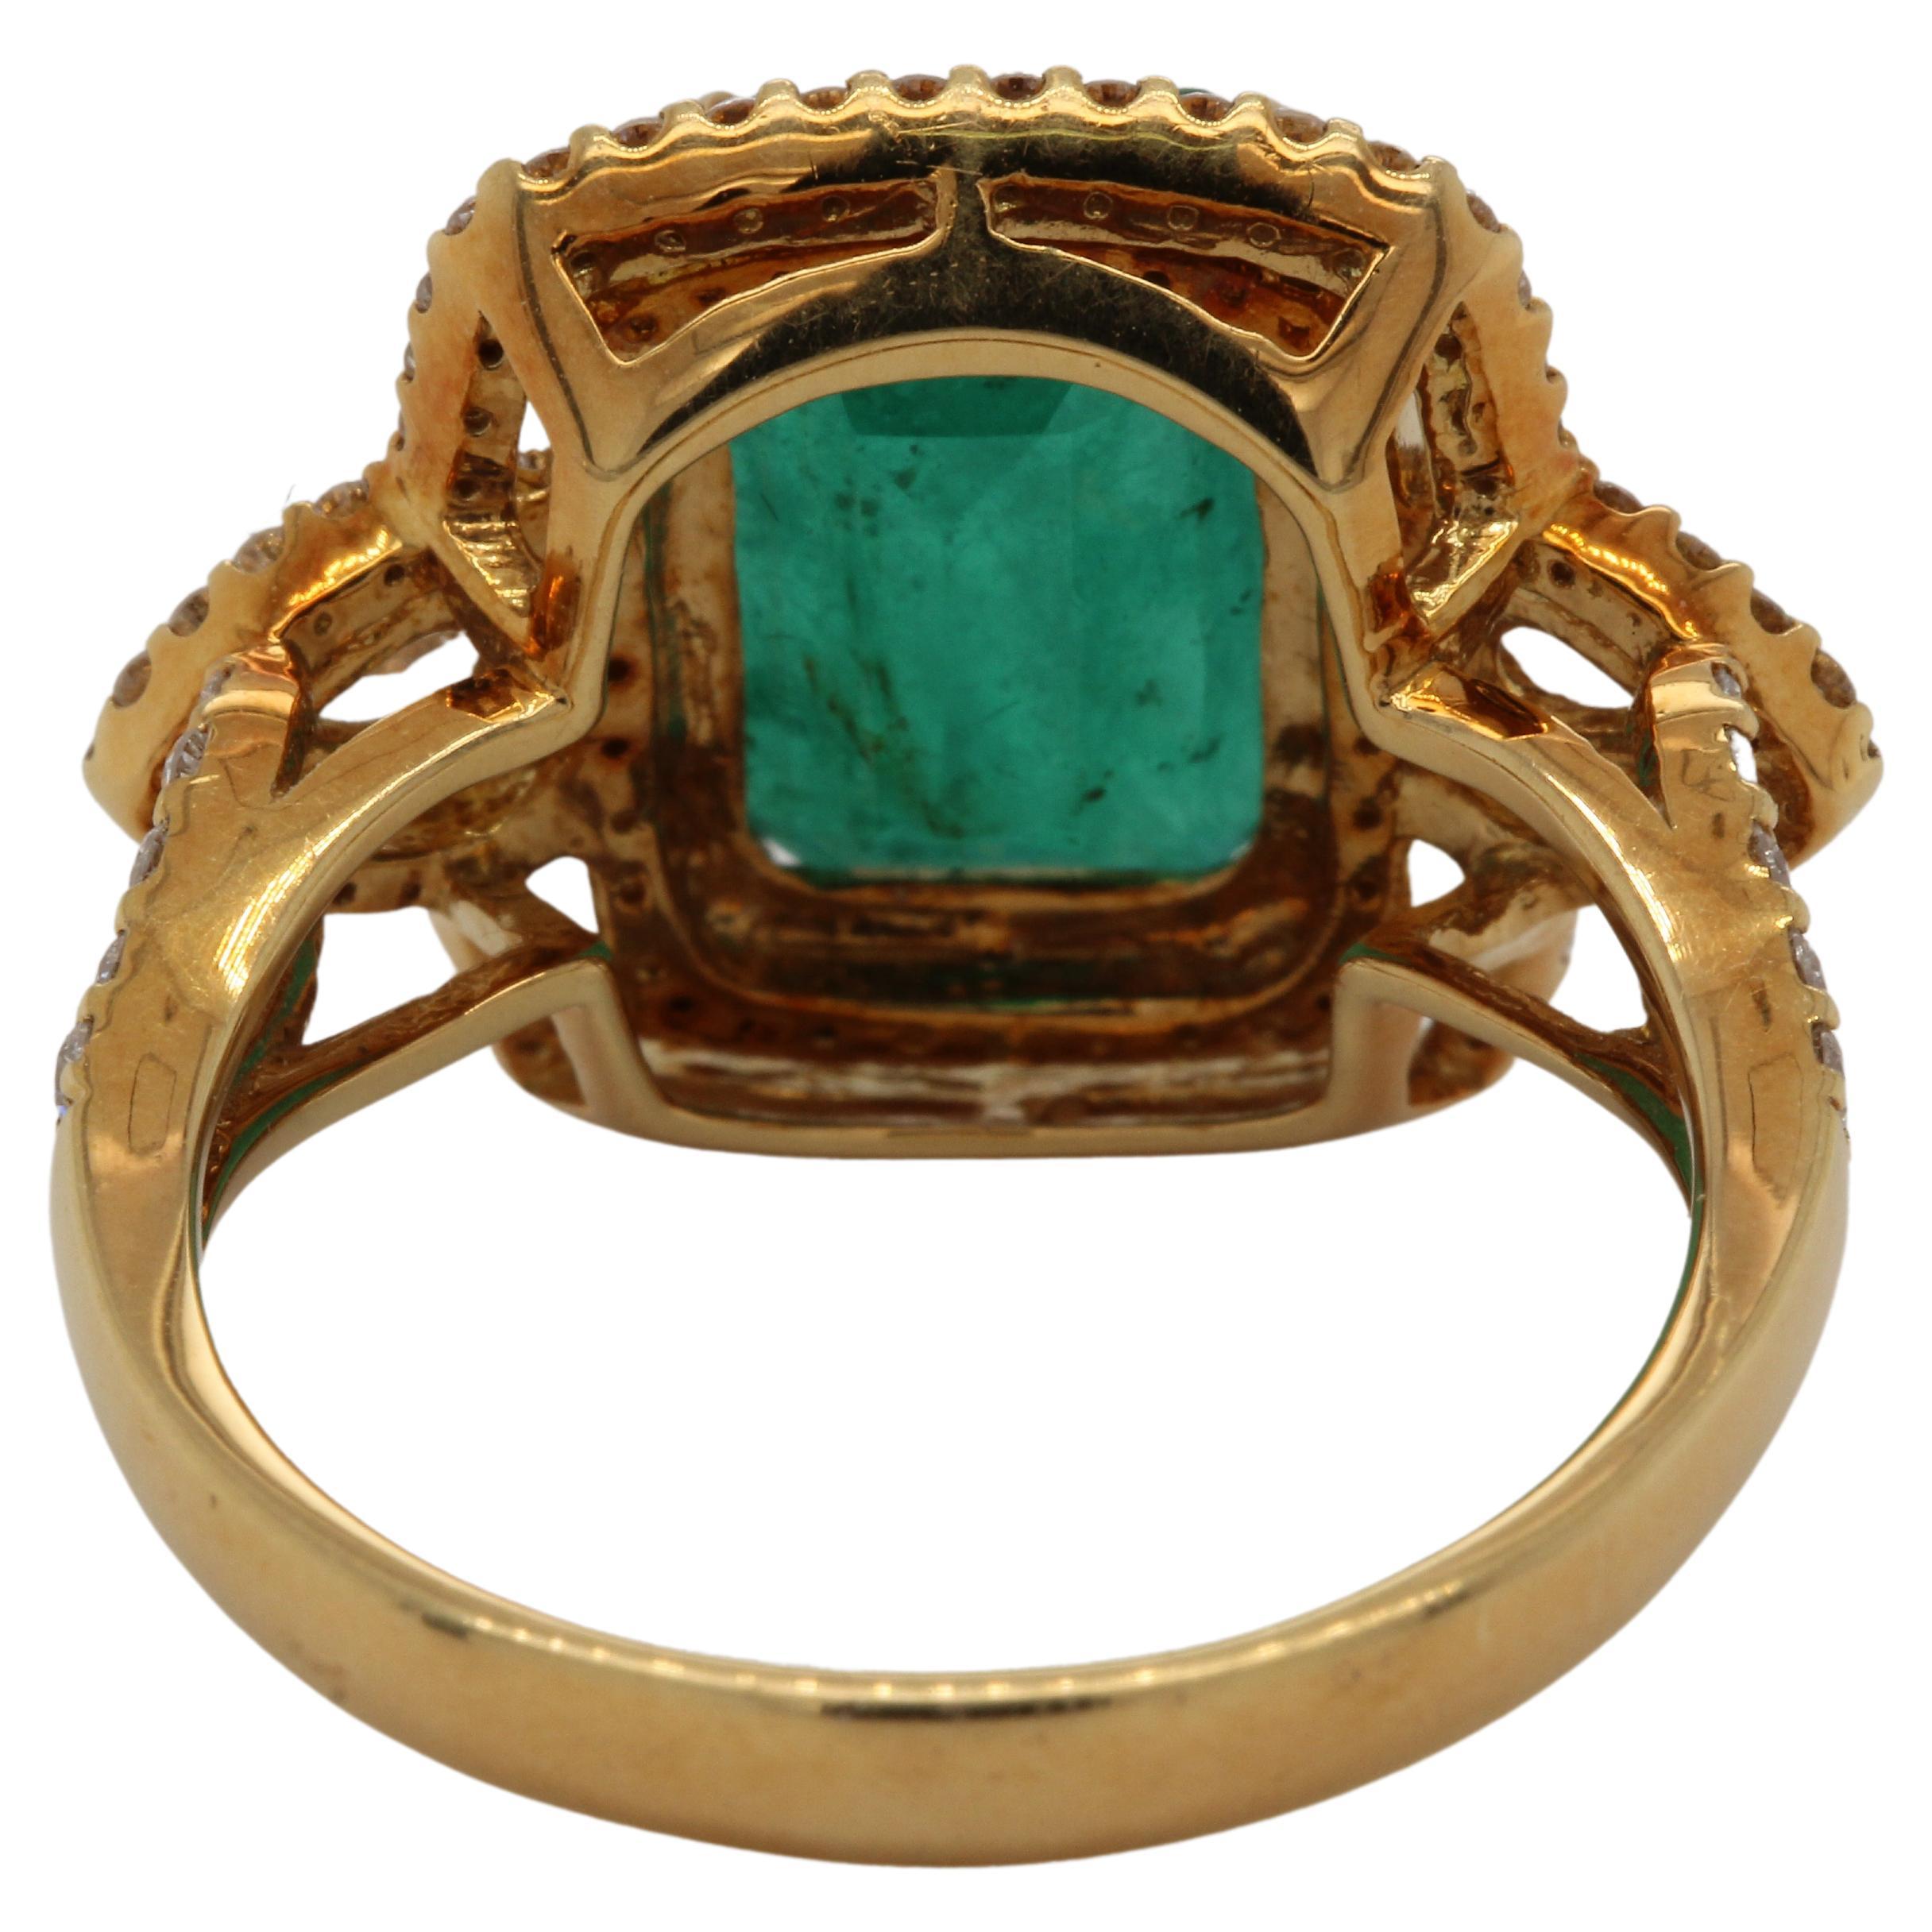 4.59 Carat Emerald And Diamond Ring In 18 Karat Gold For Sale 3